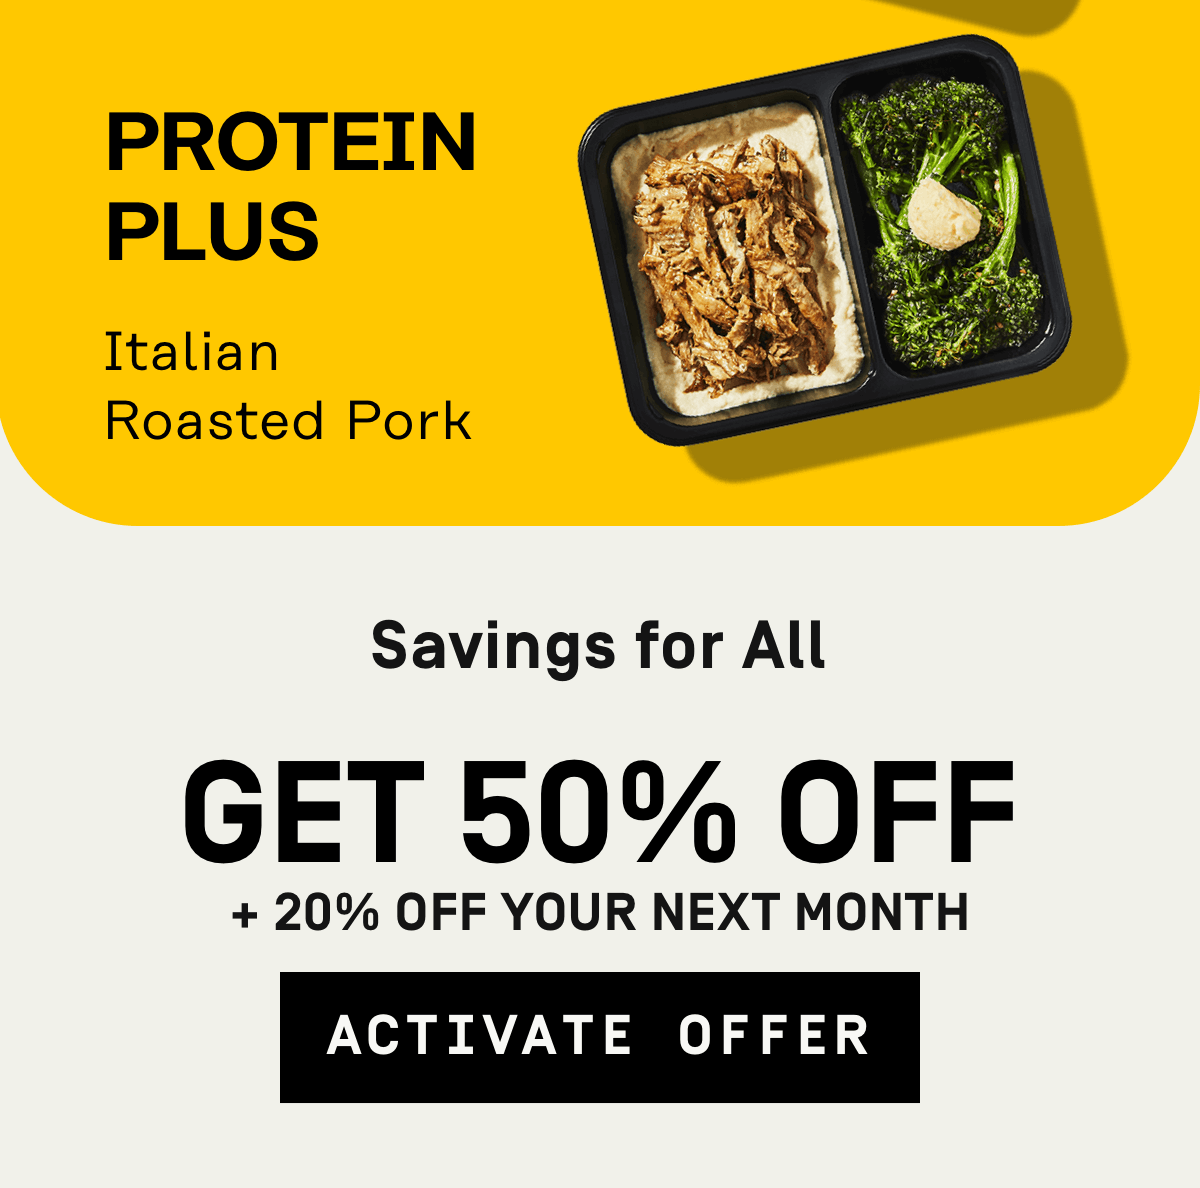 Savings for all Get 50% Off + 20% Off your next month | Activate Offer